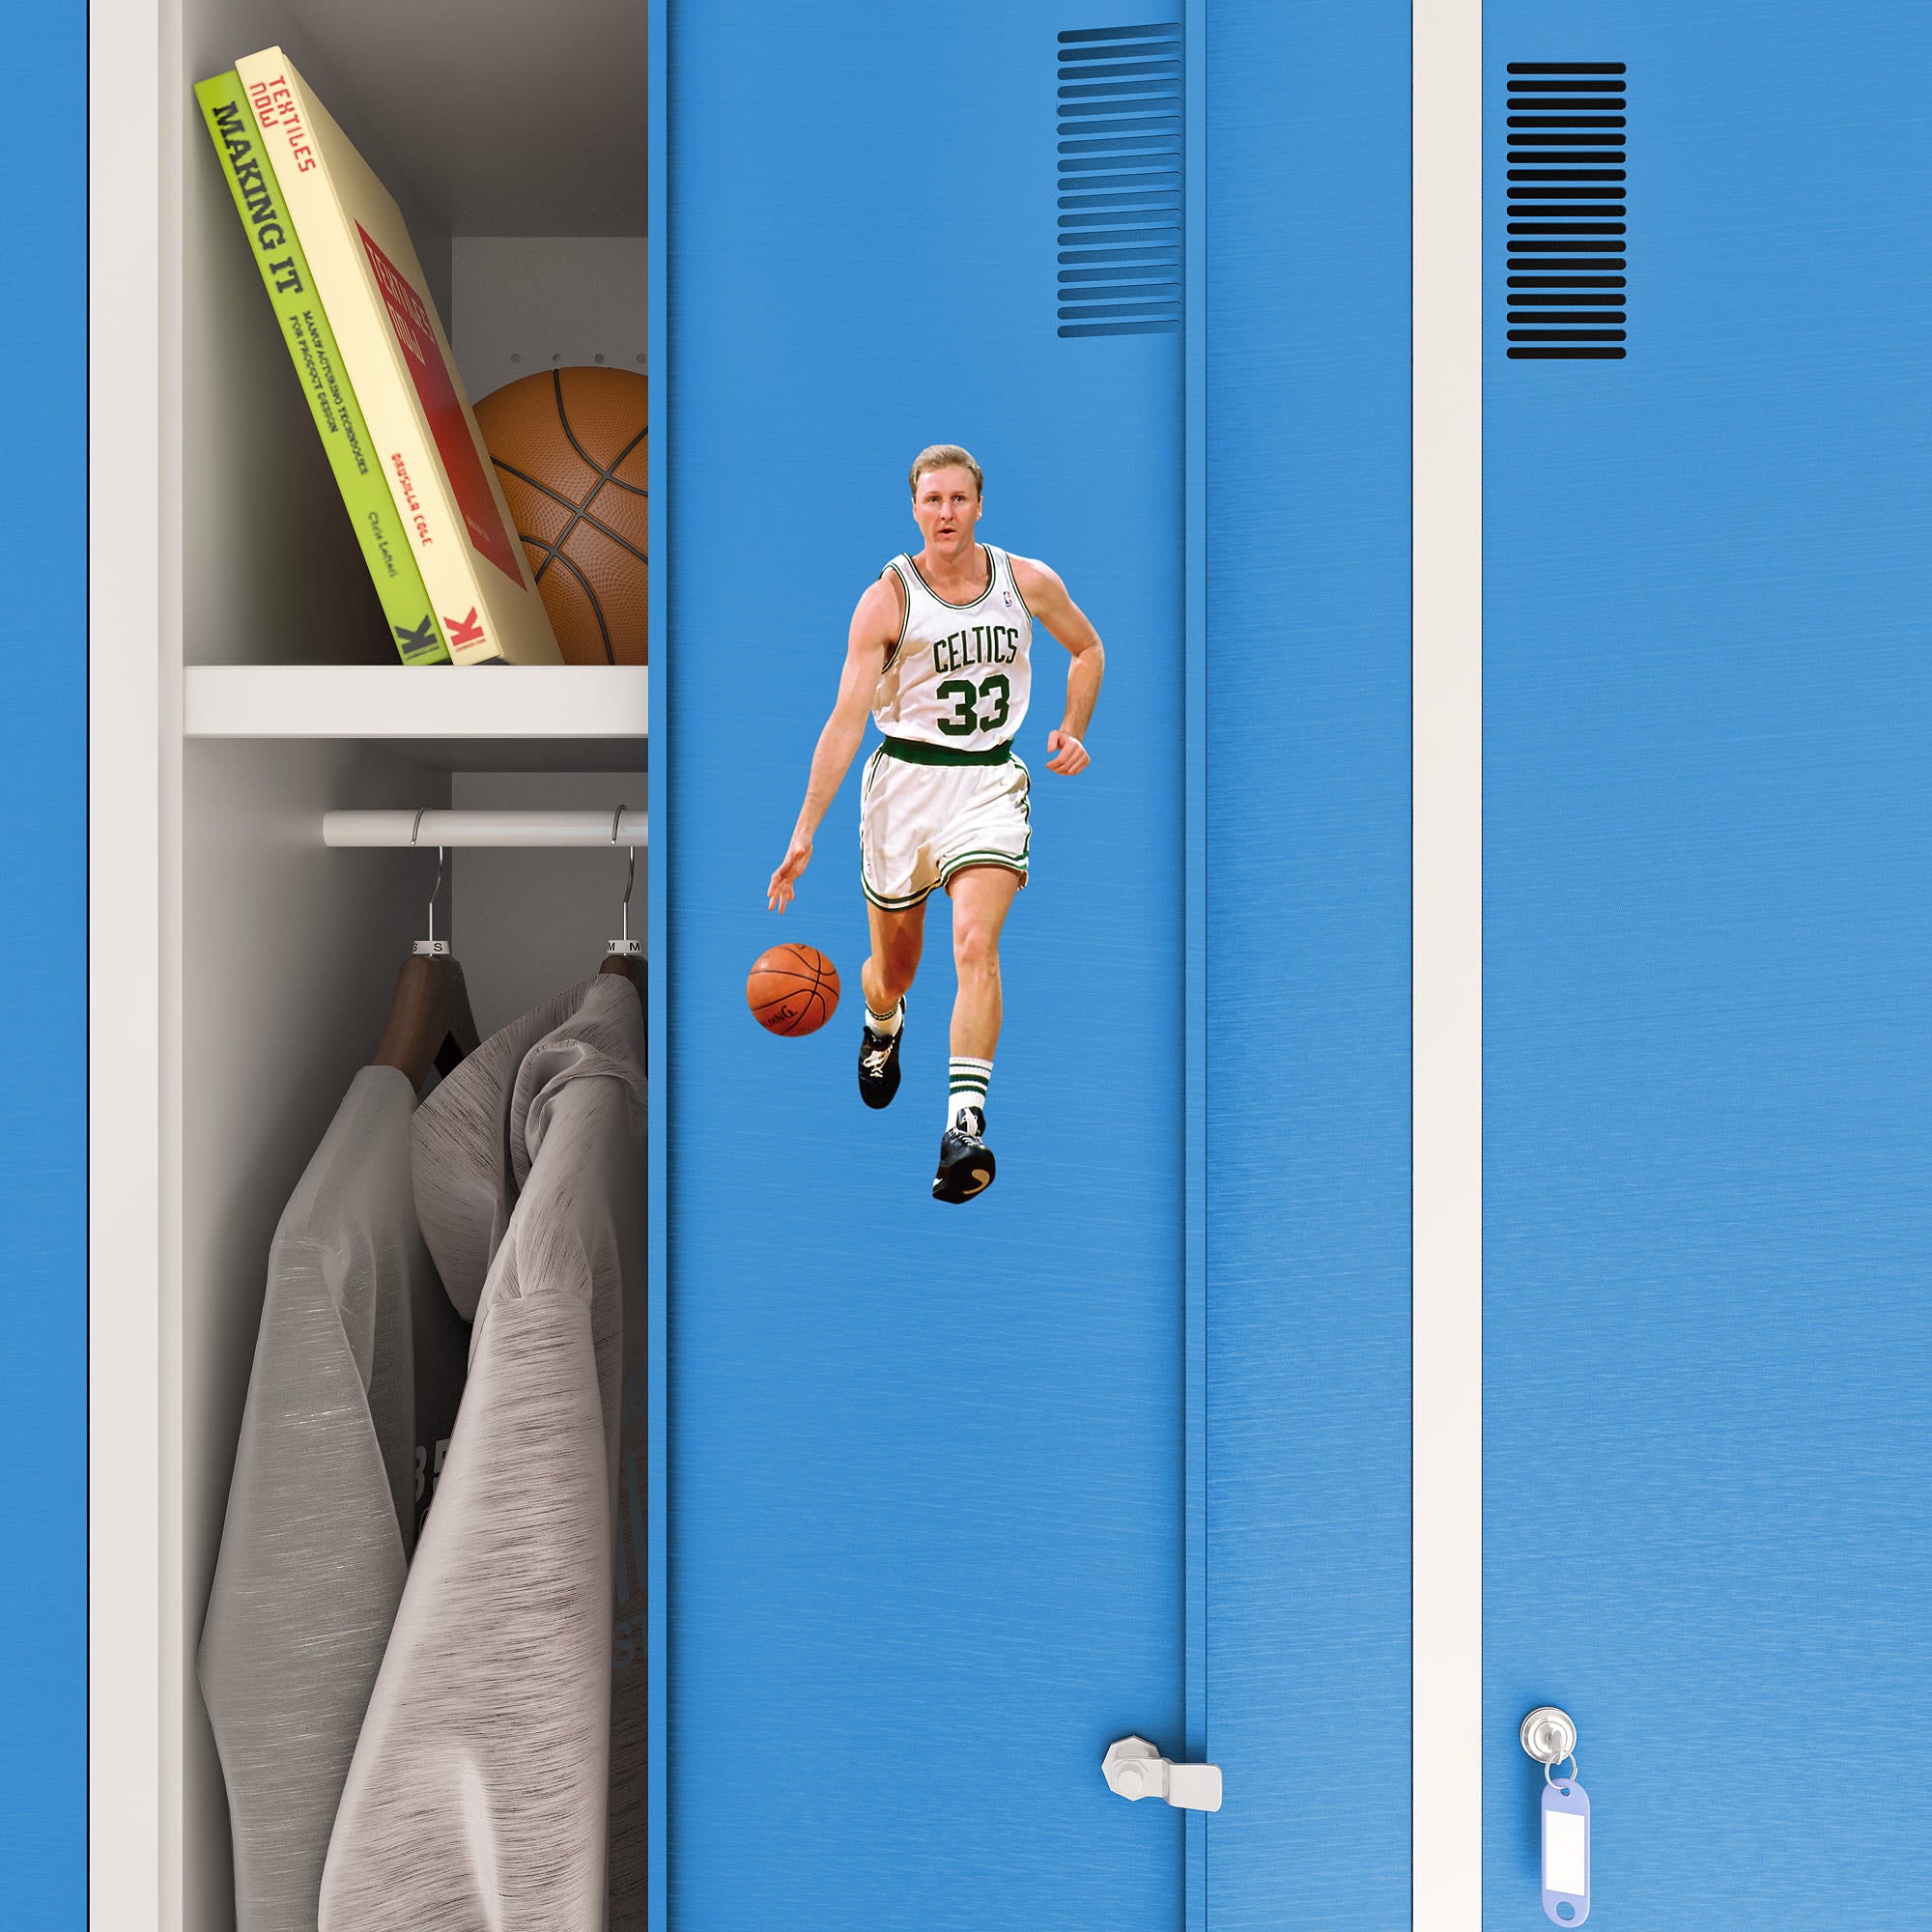 Larry Bird for Boston Celtics - Officially Licensed NBA Removable Wall Decal 8.0"W x 16.5"H by Fathead | Vinyl